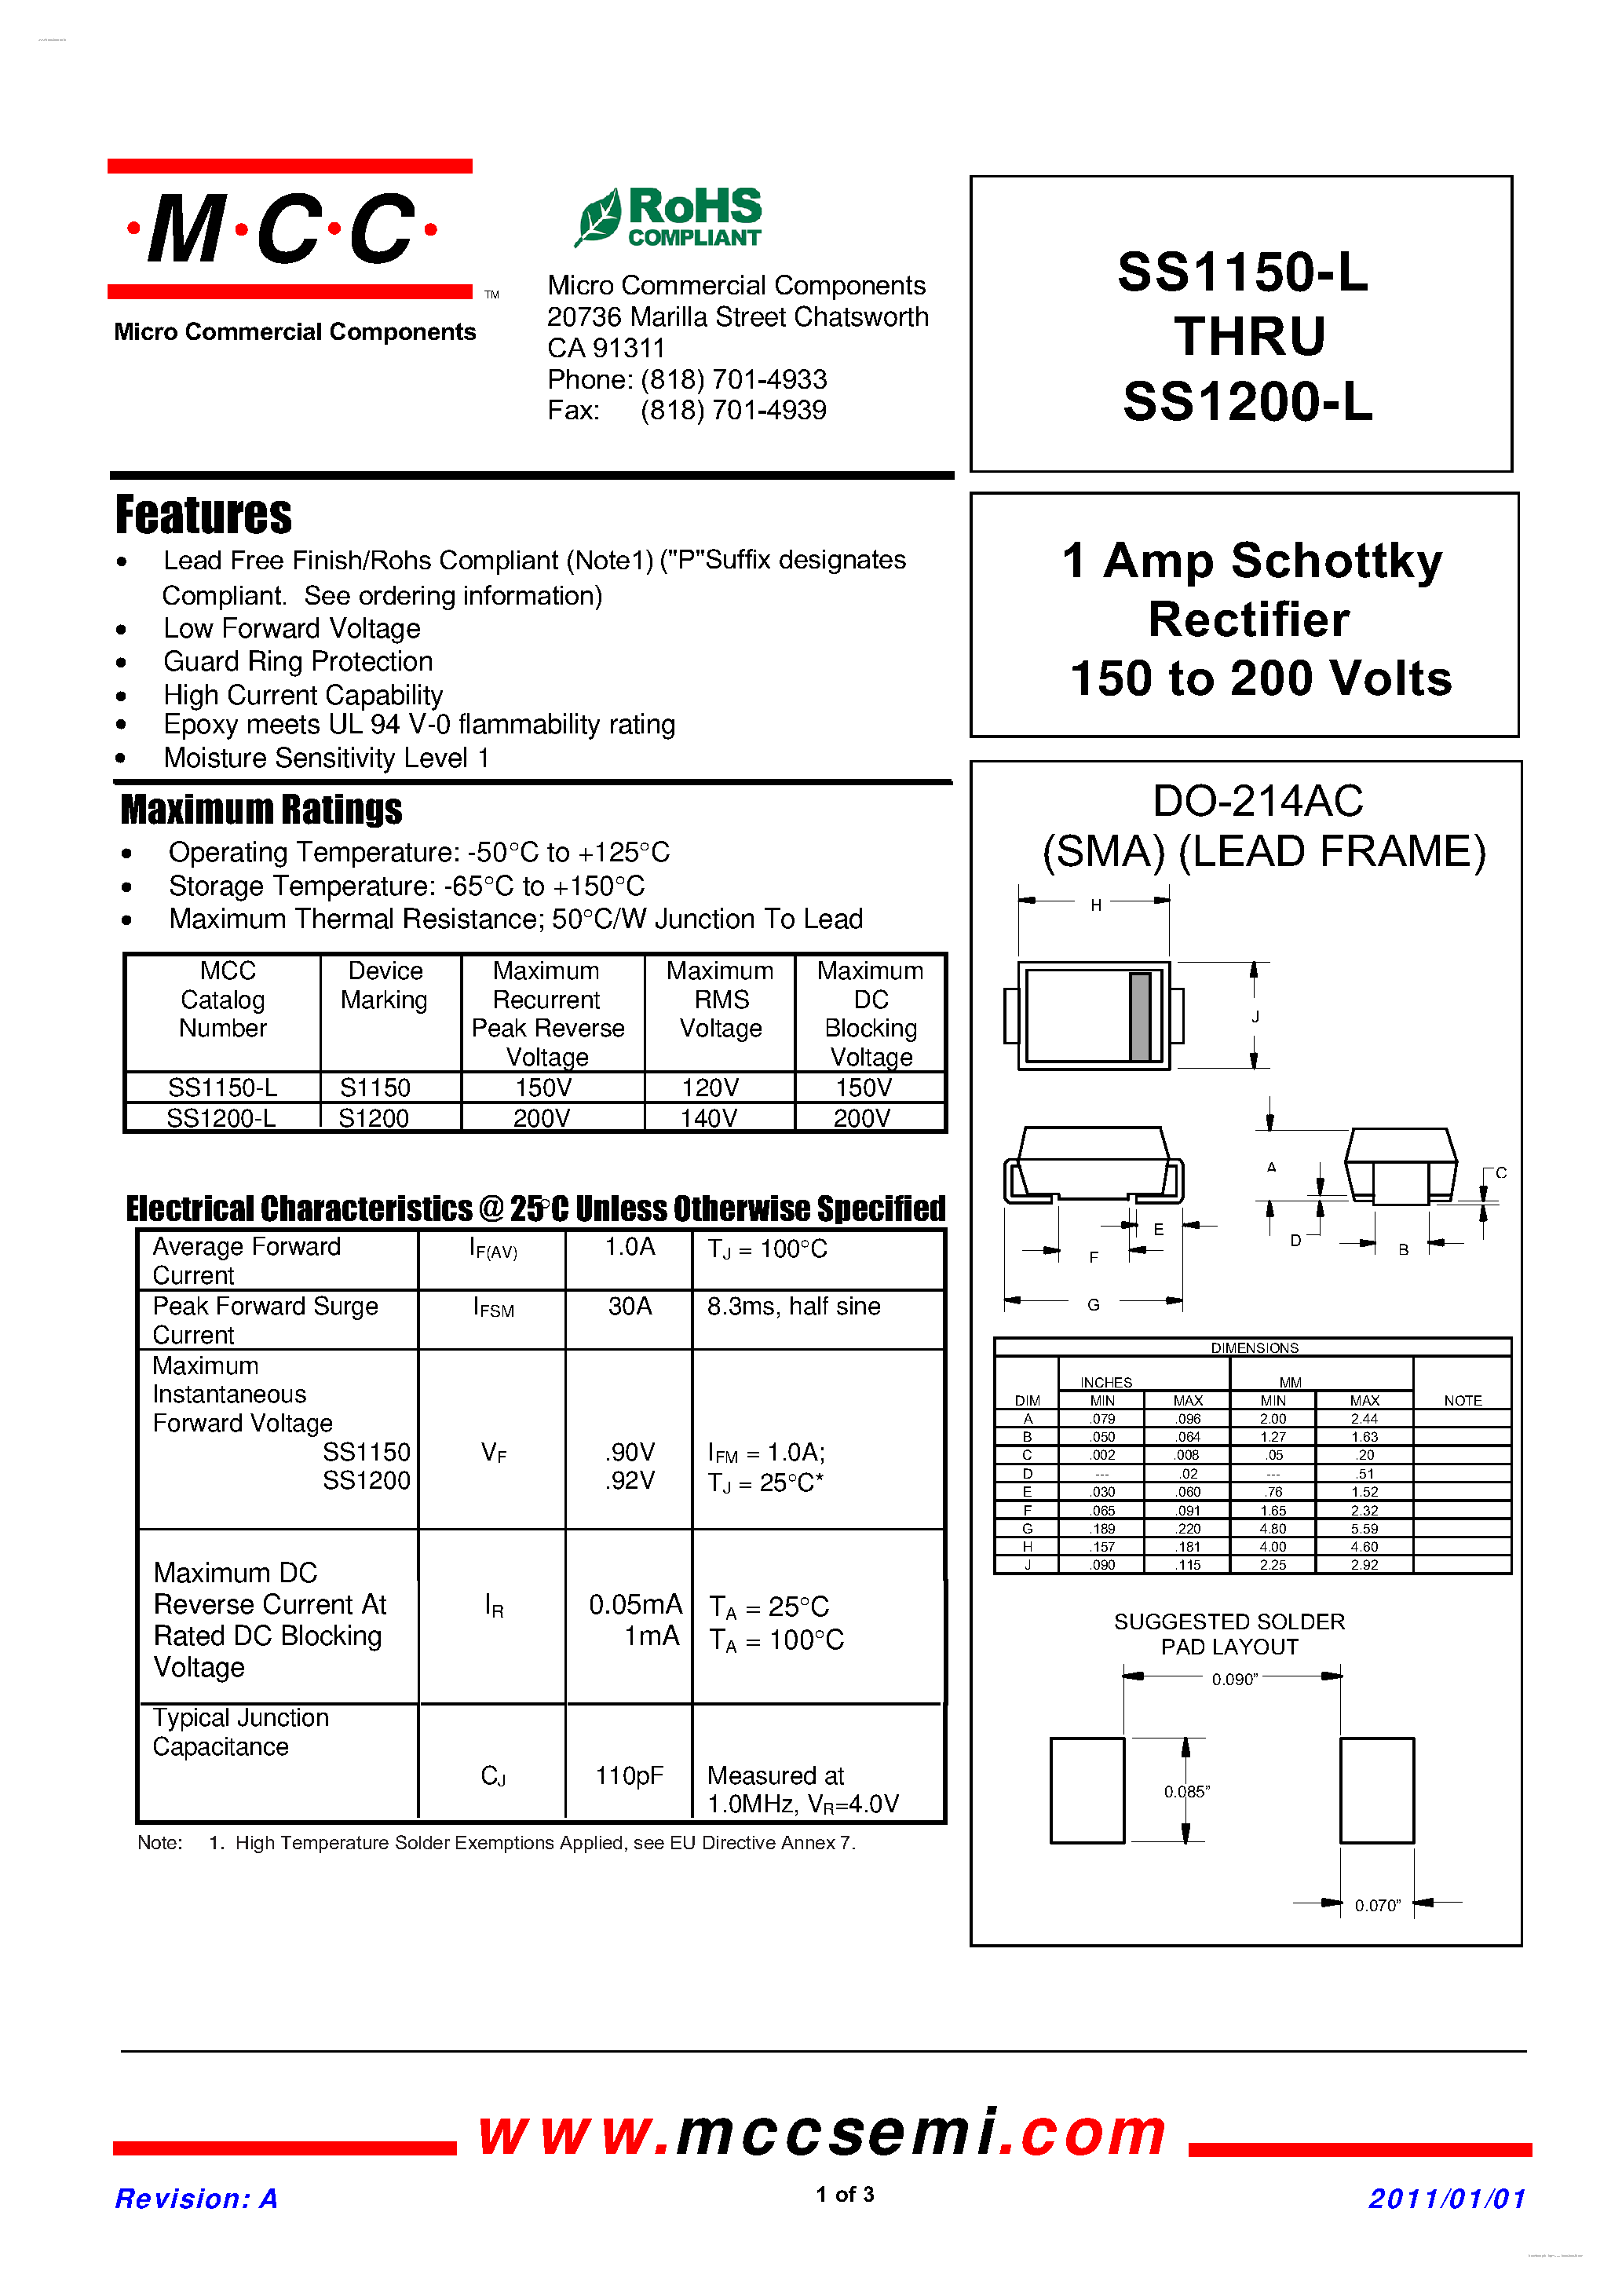 Datasheet SS1150-L - (SS1150-L / SS1200-L) 1 Amp Schottky Rectifier page 1